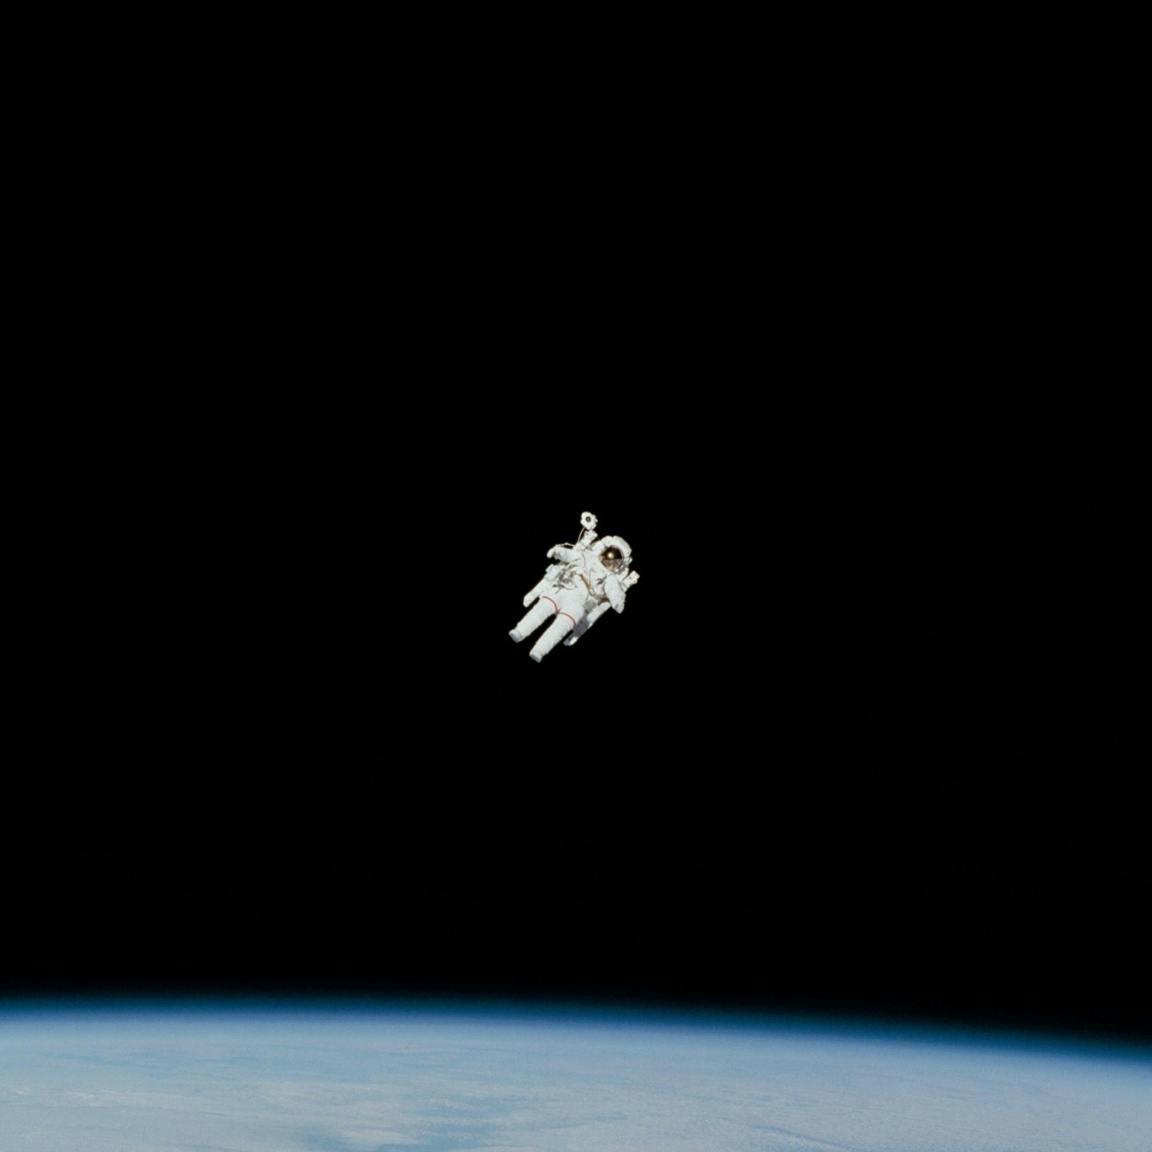 An astronaut floating in space with a black background and a sliver of the earth in the bottom of the frame